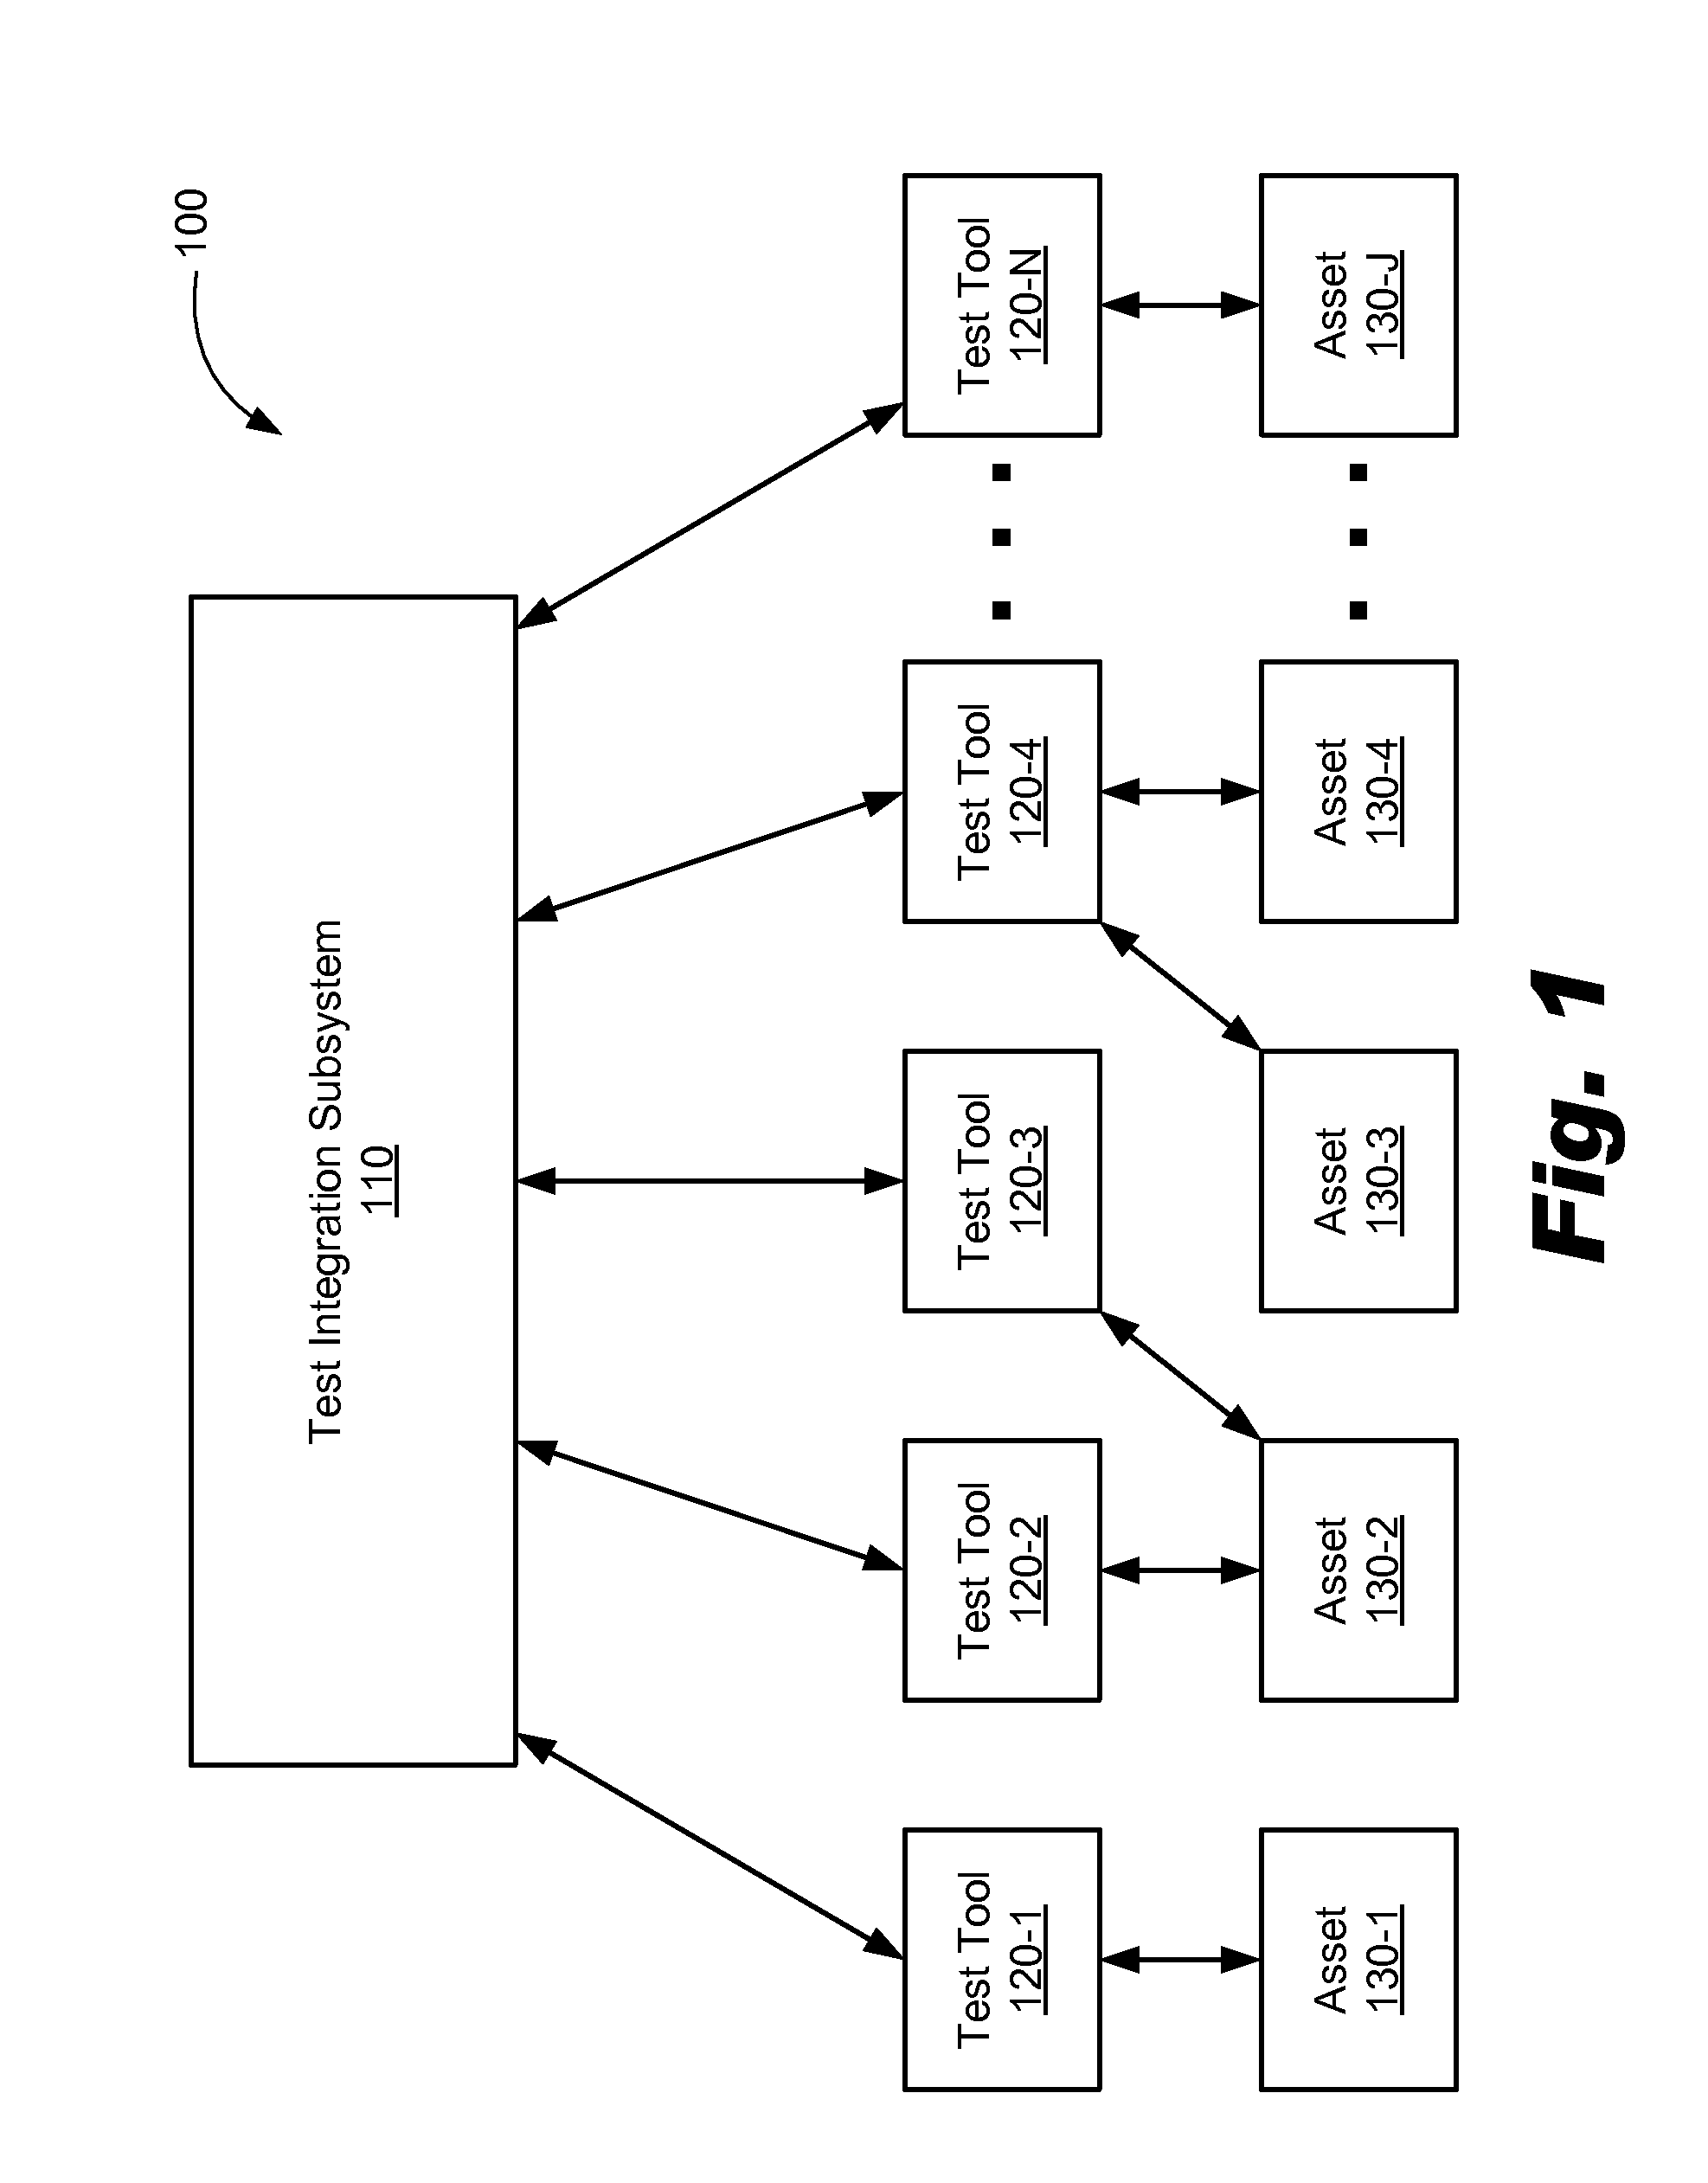 Integrated testing systems and methods